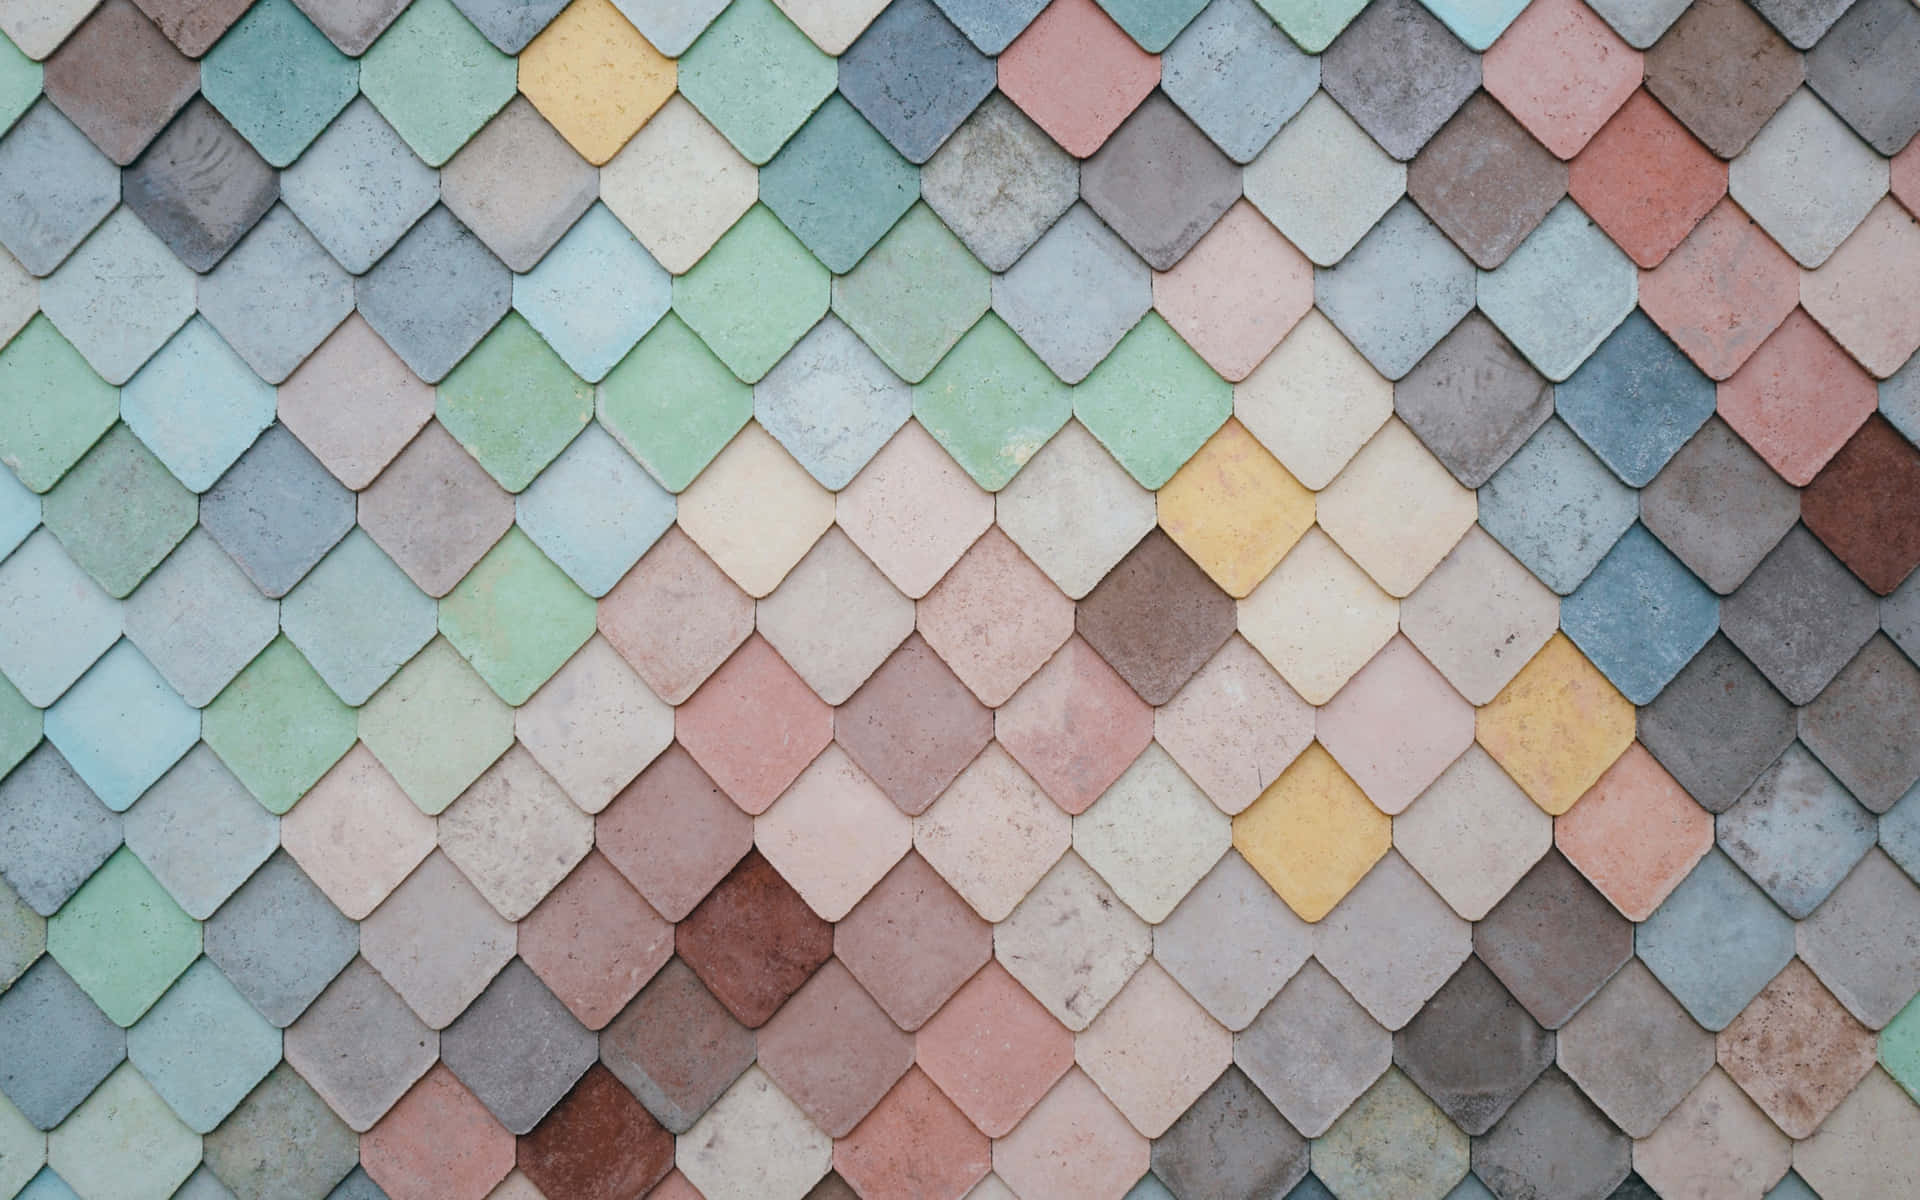 A Colorful Tiled Wall With Different Colored Tiles